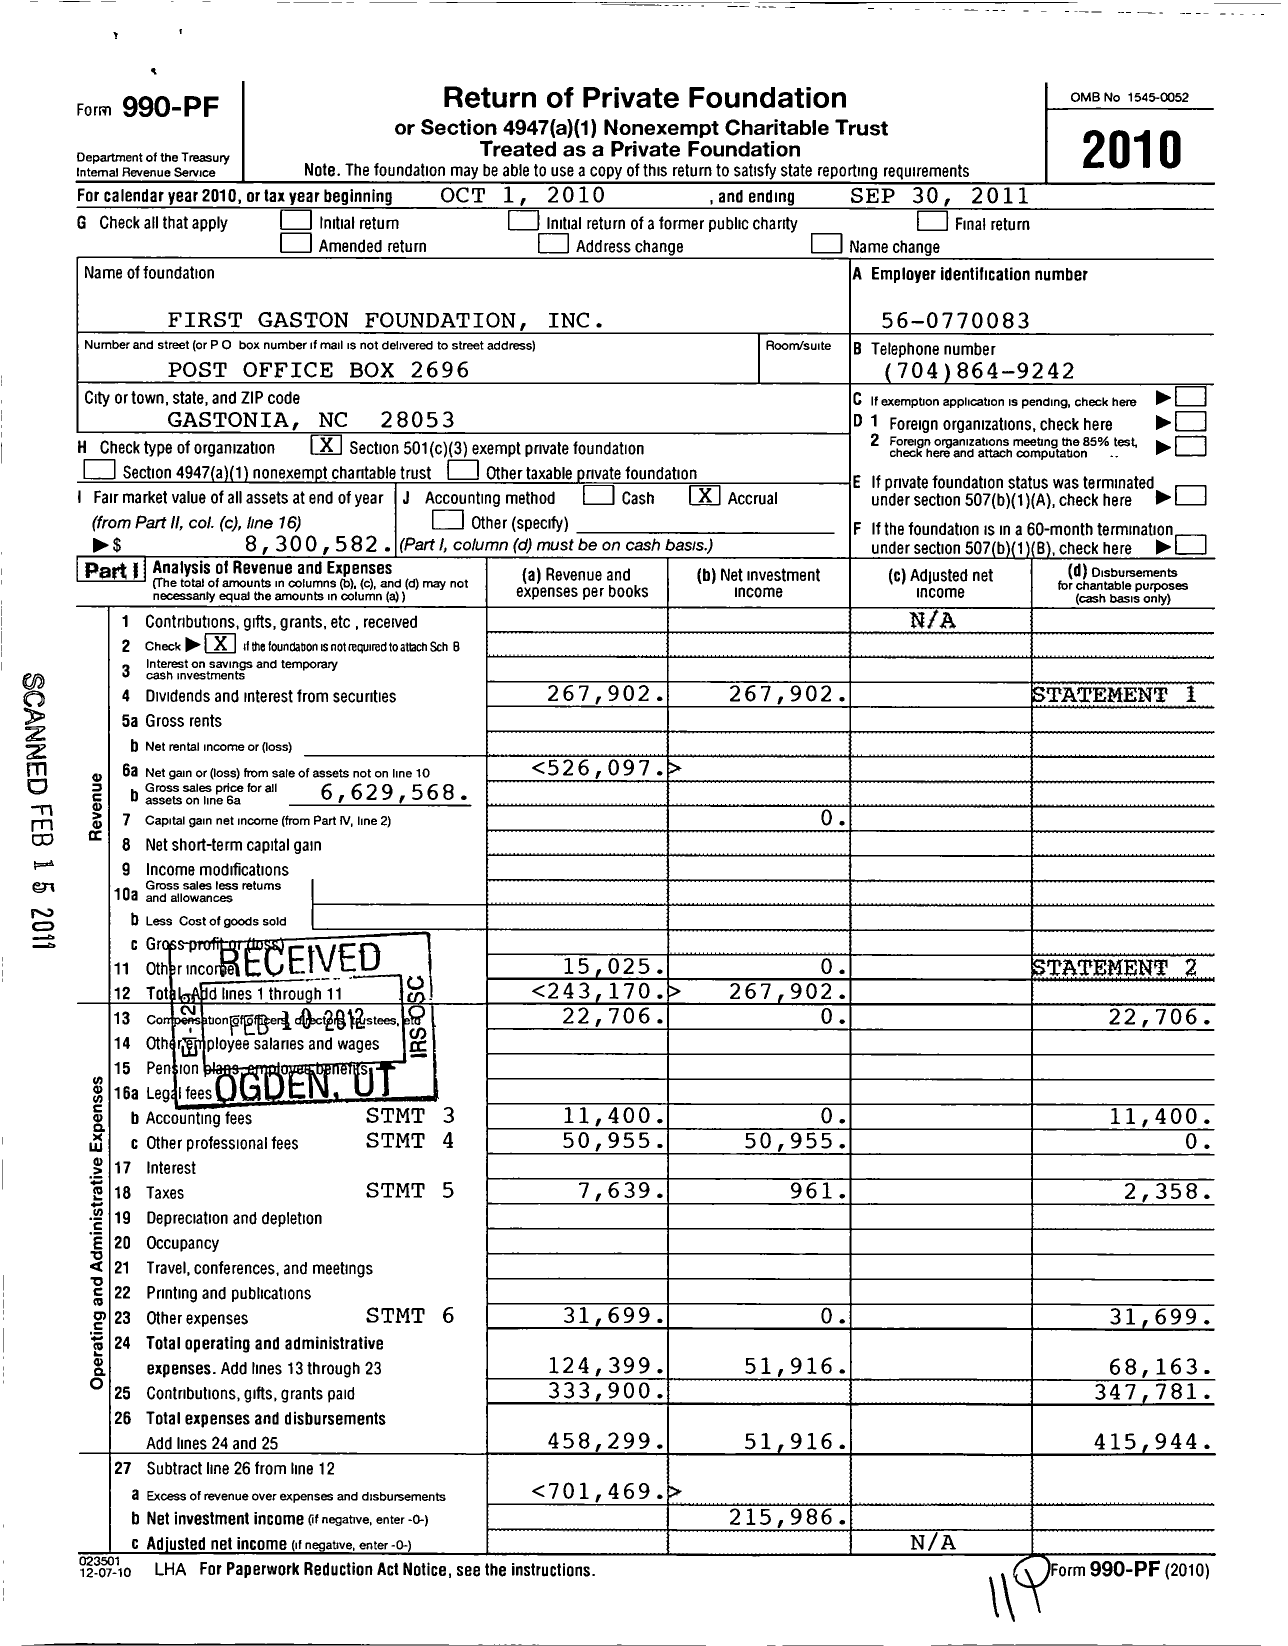 Image of first page of 2010 Form 990PF for First Gaston Foundation